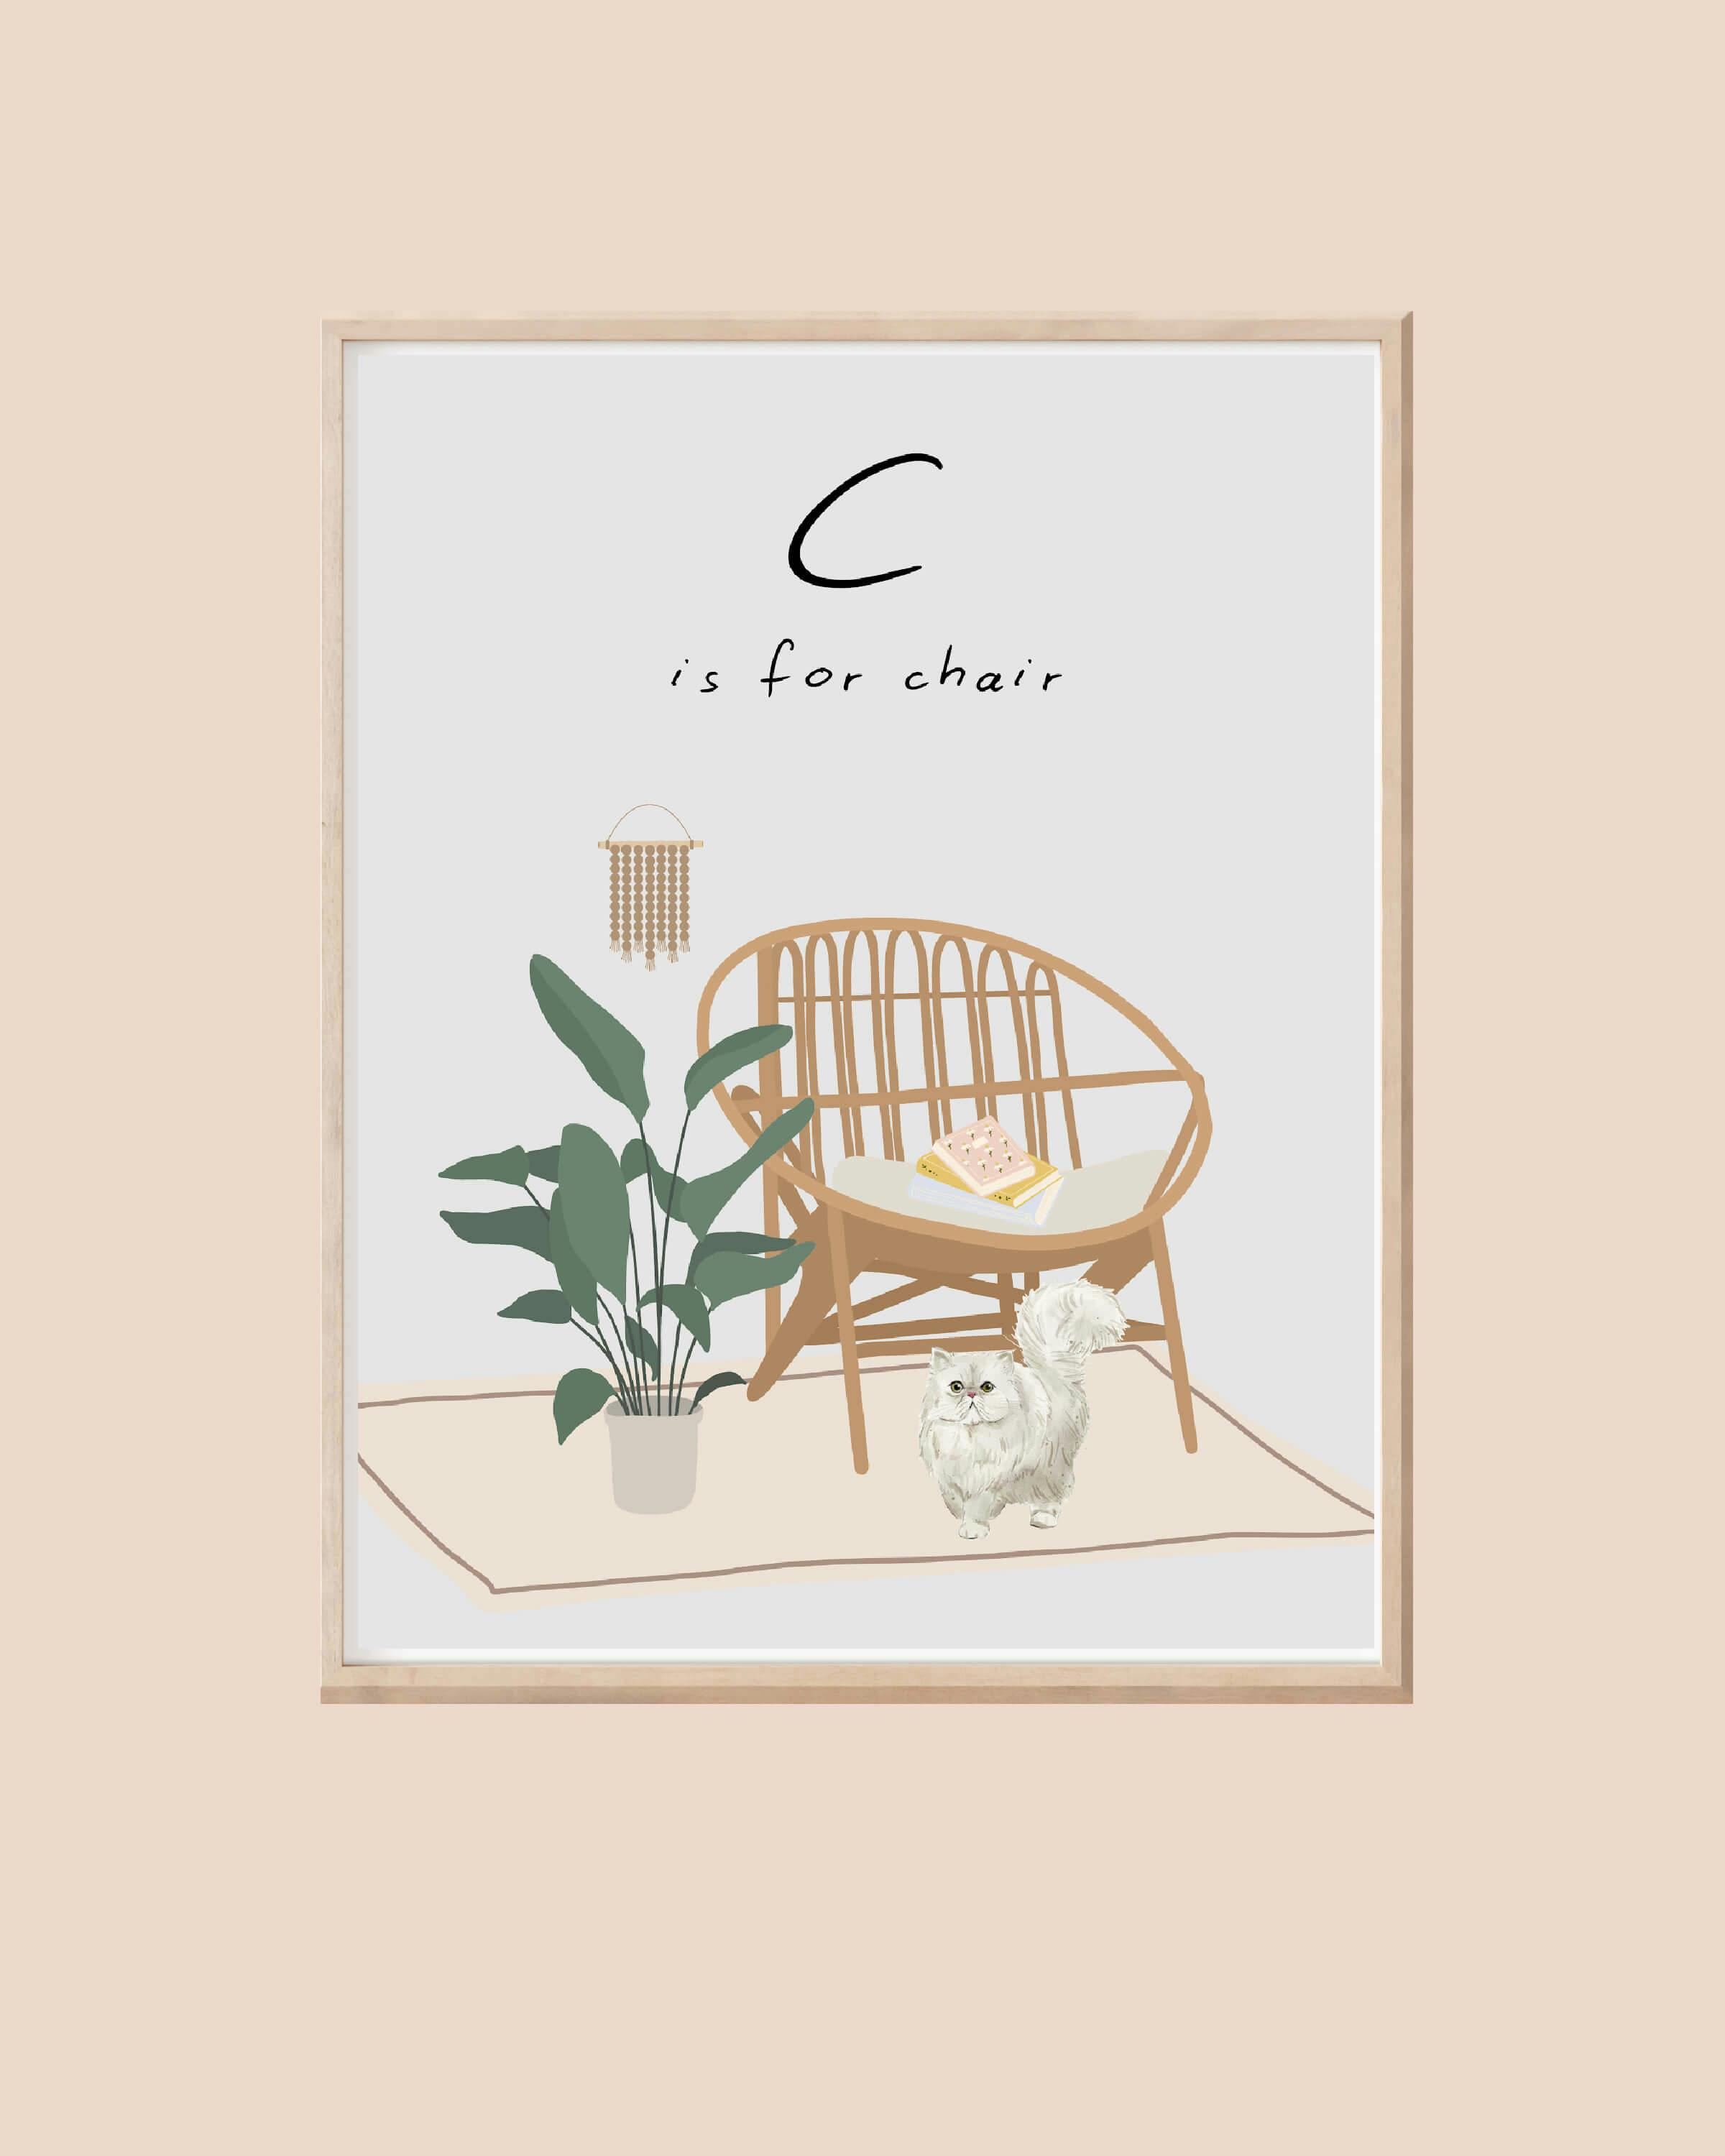 Baby's Room "C is for Chair" Retro Print - Digital Download - undefined - bright side girl shoppe